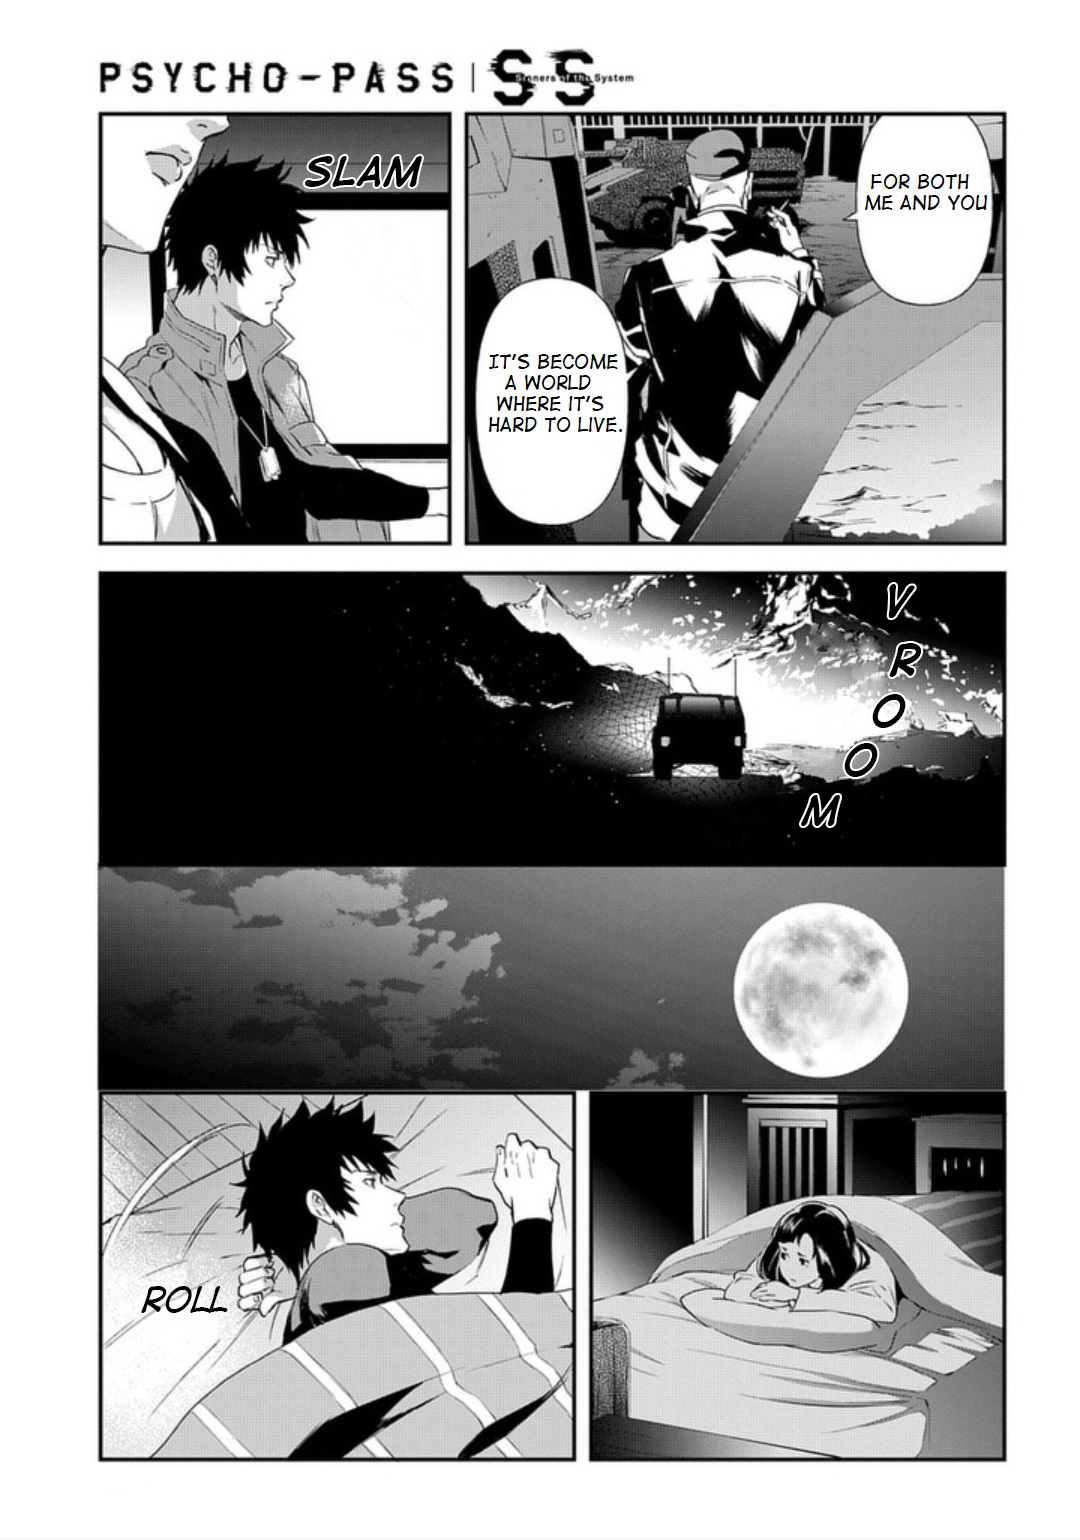 Psycho Pass: Sinners of the System Case 3 Beyond love and hate Vol. 1 Ch. 3